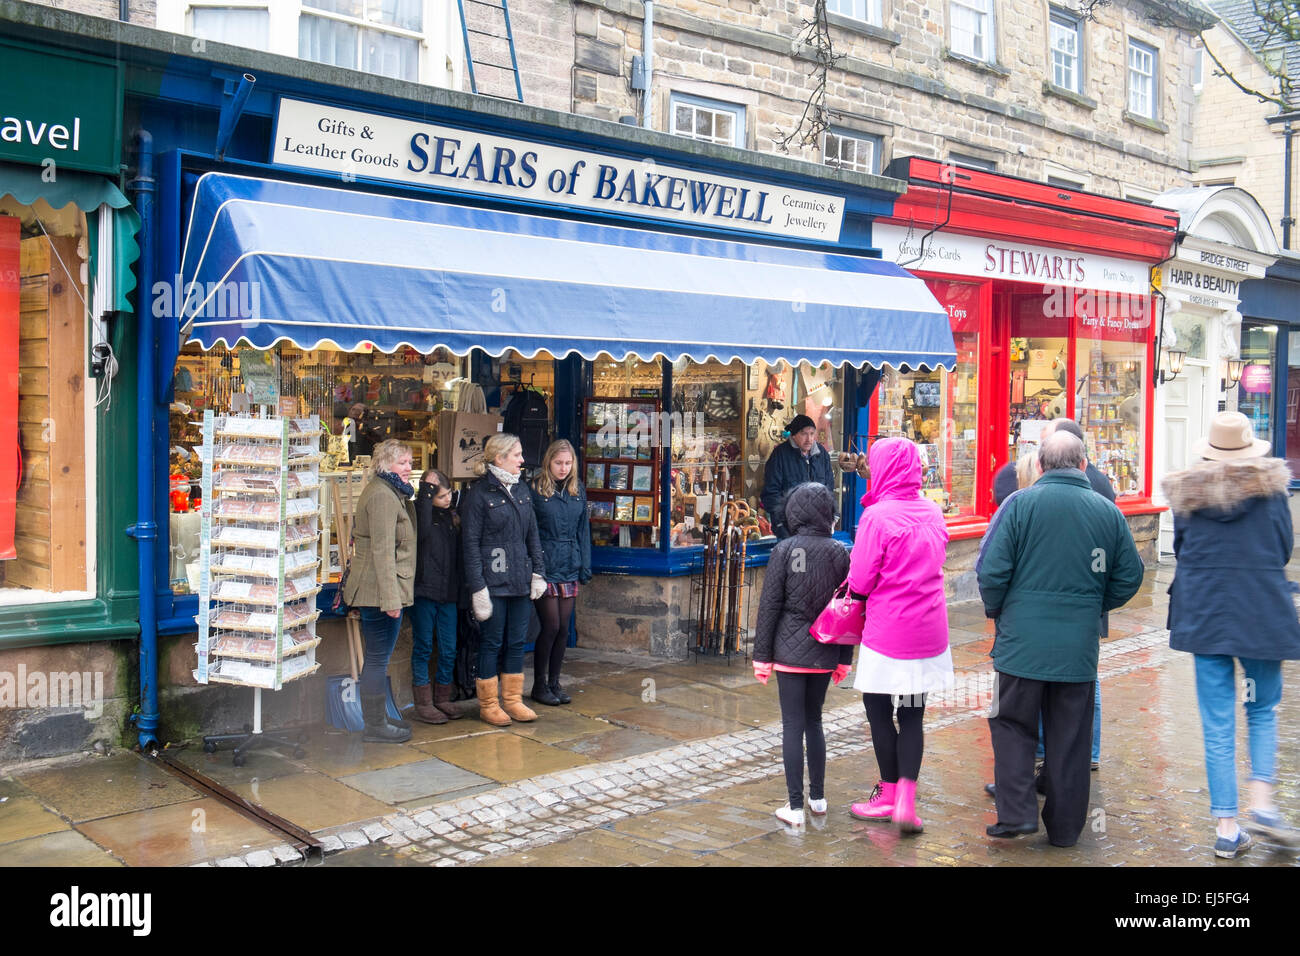 Sears of bakewell gift store in Bakewell, a popular town in Derbyshire,England Stock Photo